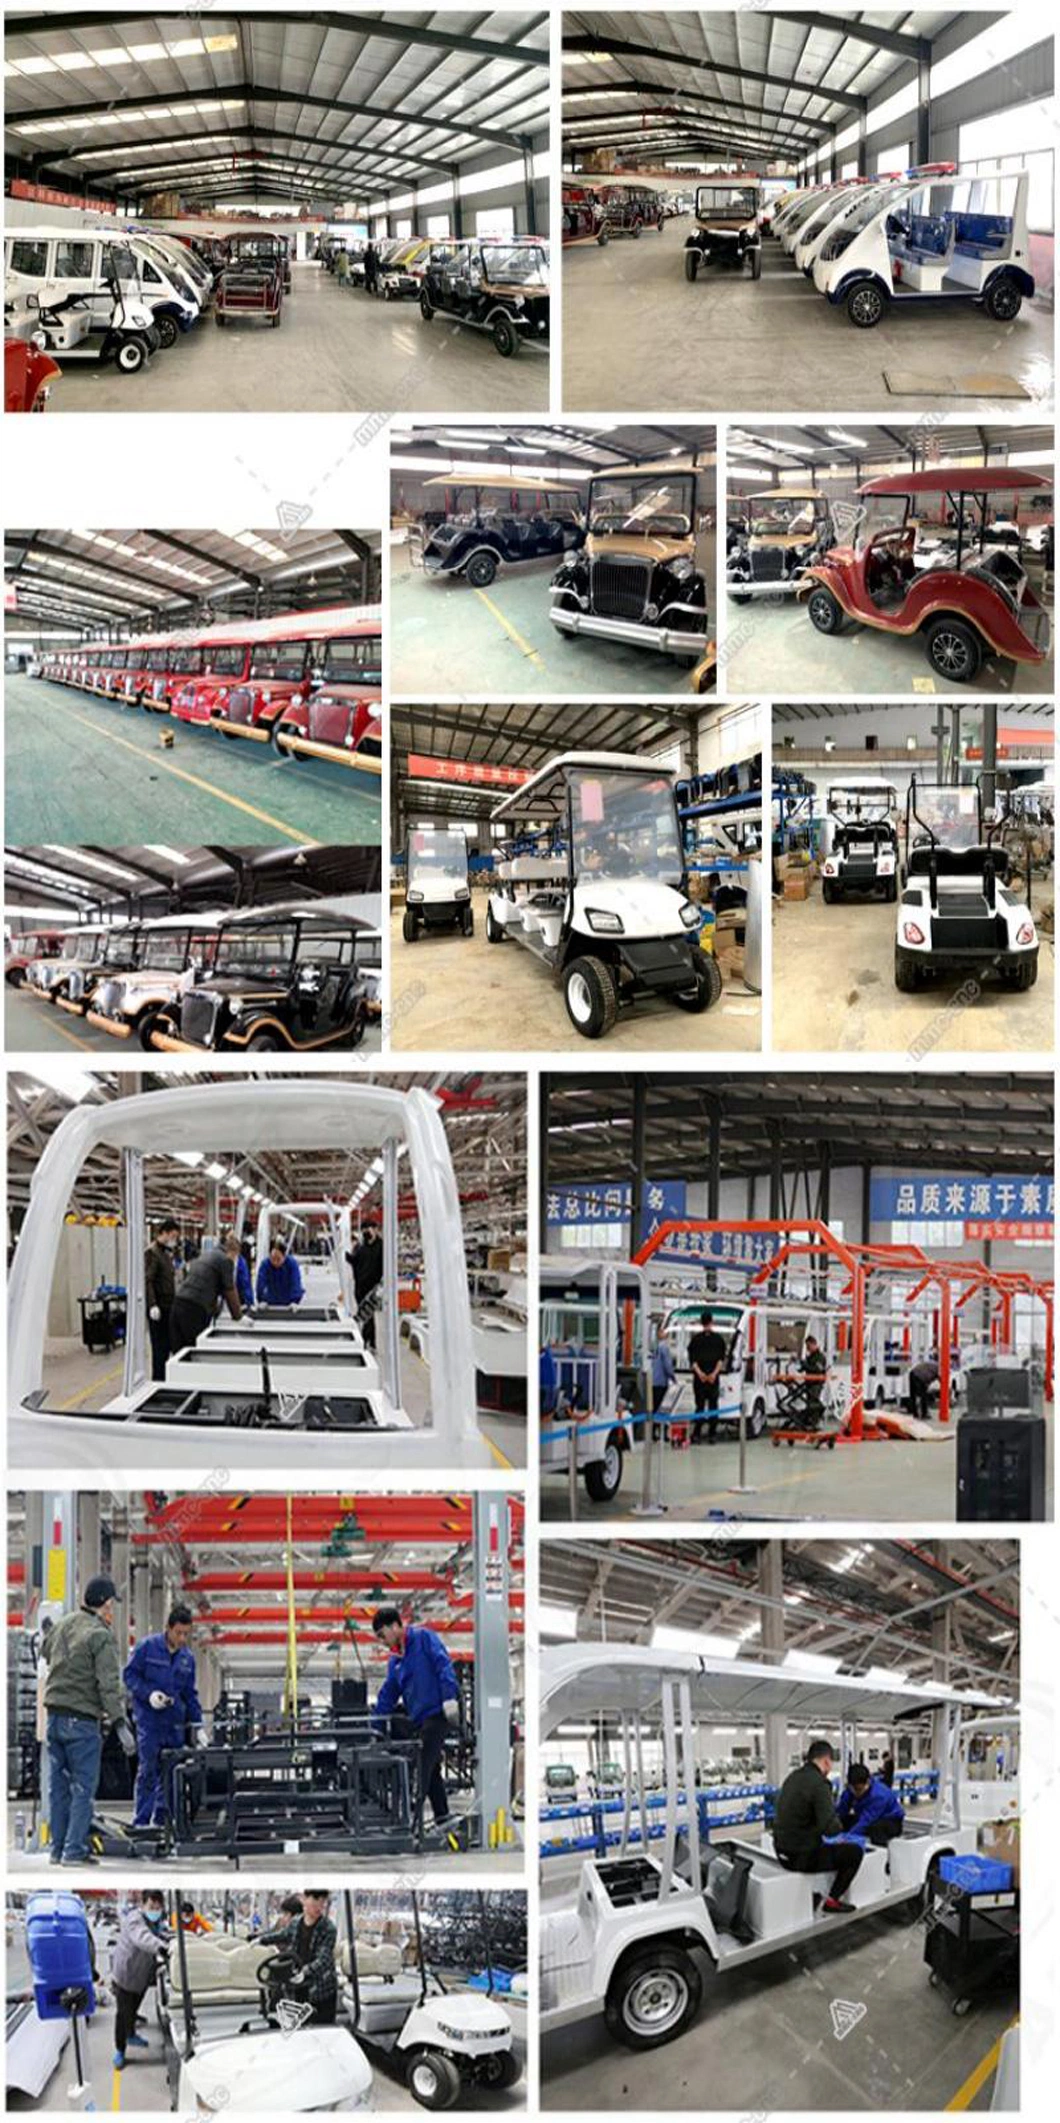 6 Seaters Small Cart Agriculture Factory Airport Transport Hunting All Terrain Battery Power Sport Club Car Modified Custom Cool Electric Golf Cart Mini Car